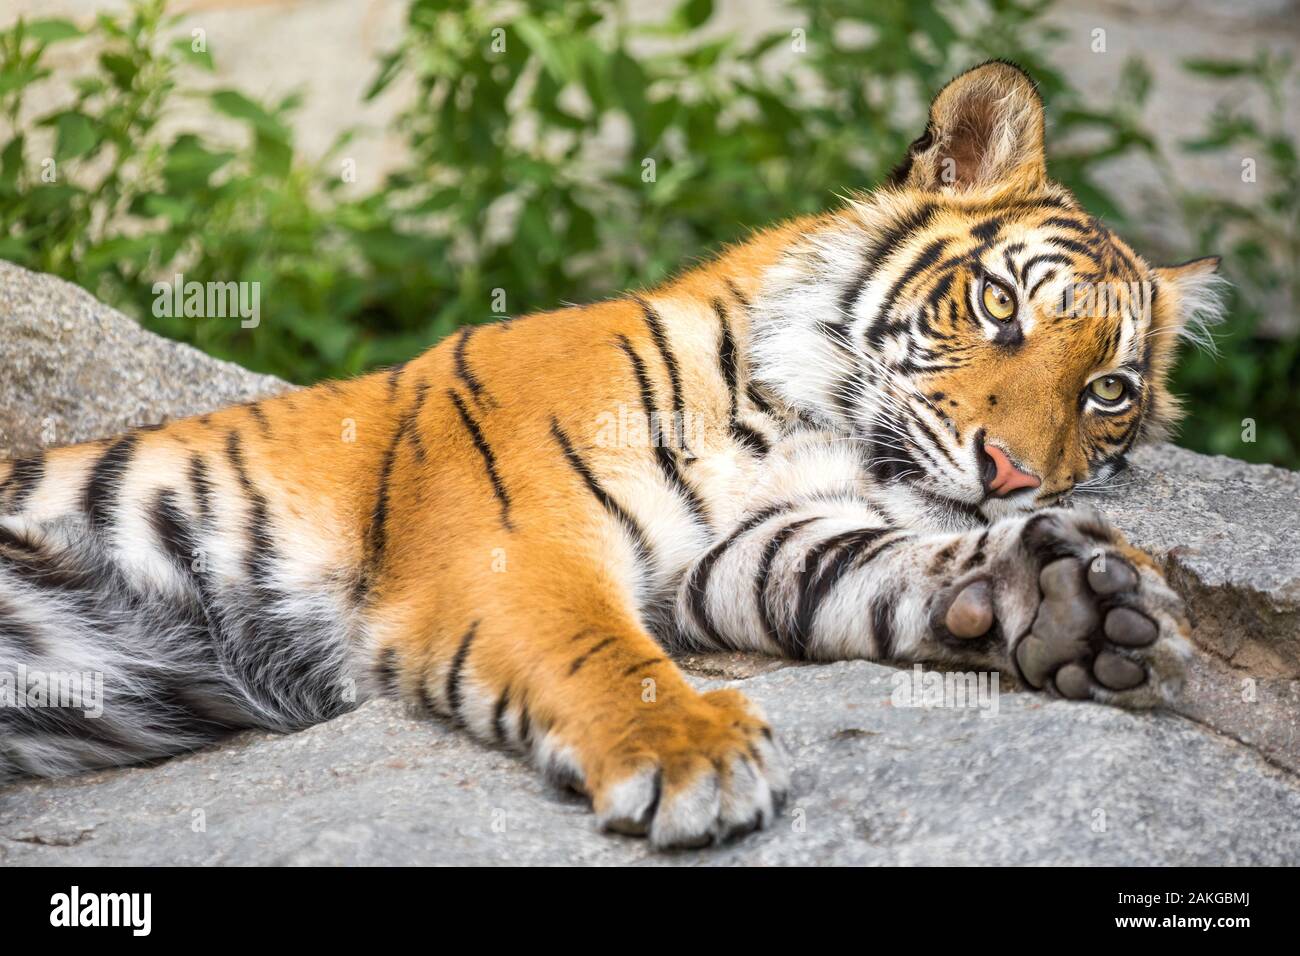 Close up shot of a large tiger lying on its side, against a bokeh background Stock Photo